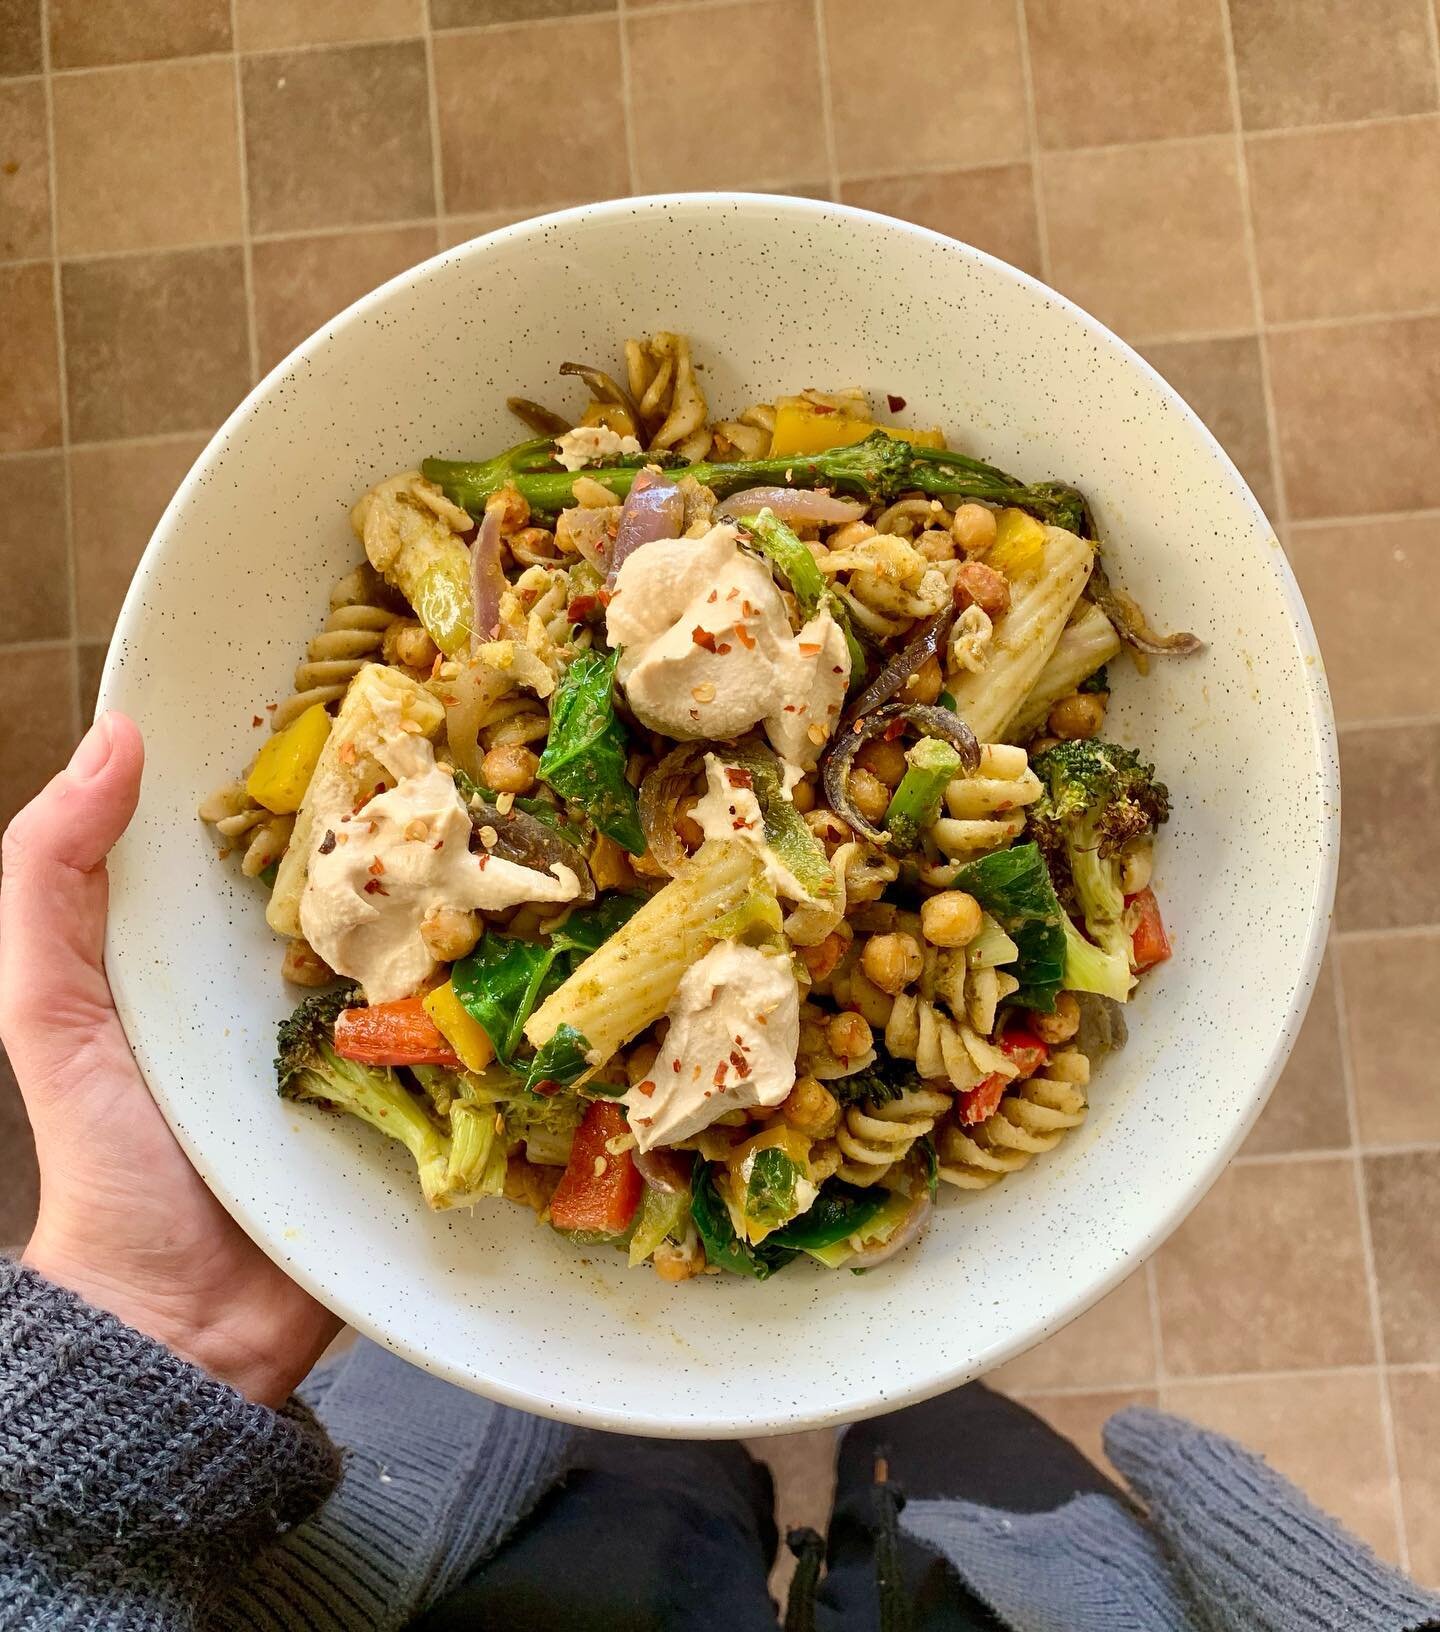 Roast vegetable pesto pasta with paprika chickpeas and homemade cashew cheese dolloped on top.

Quick, easy and great for getting a variety of plant foods into your day. I roasted mixed peppers, red onion, broccoli with salt and pepper. Chickpeas roa